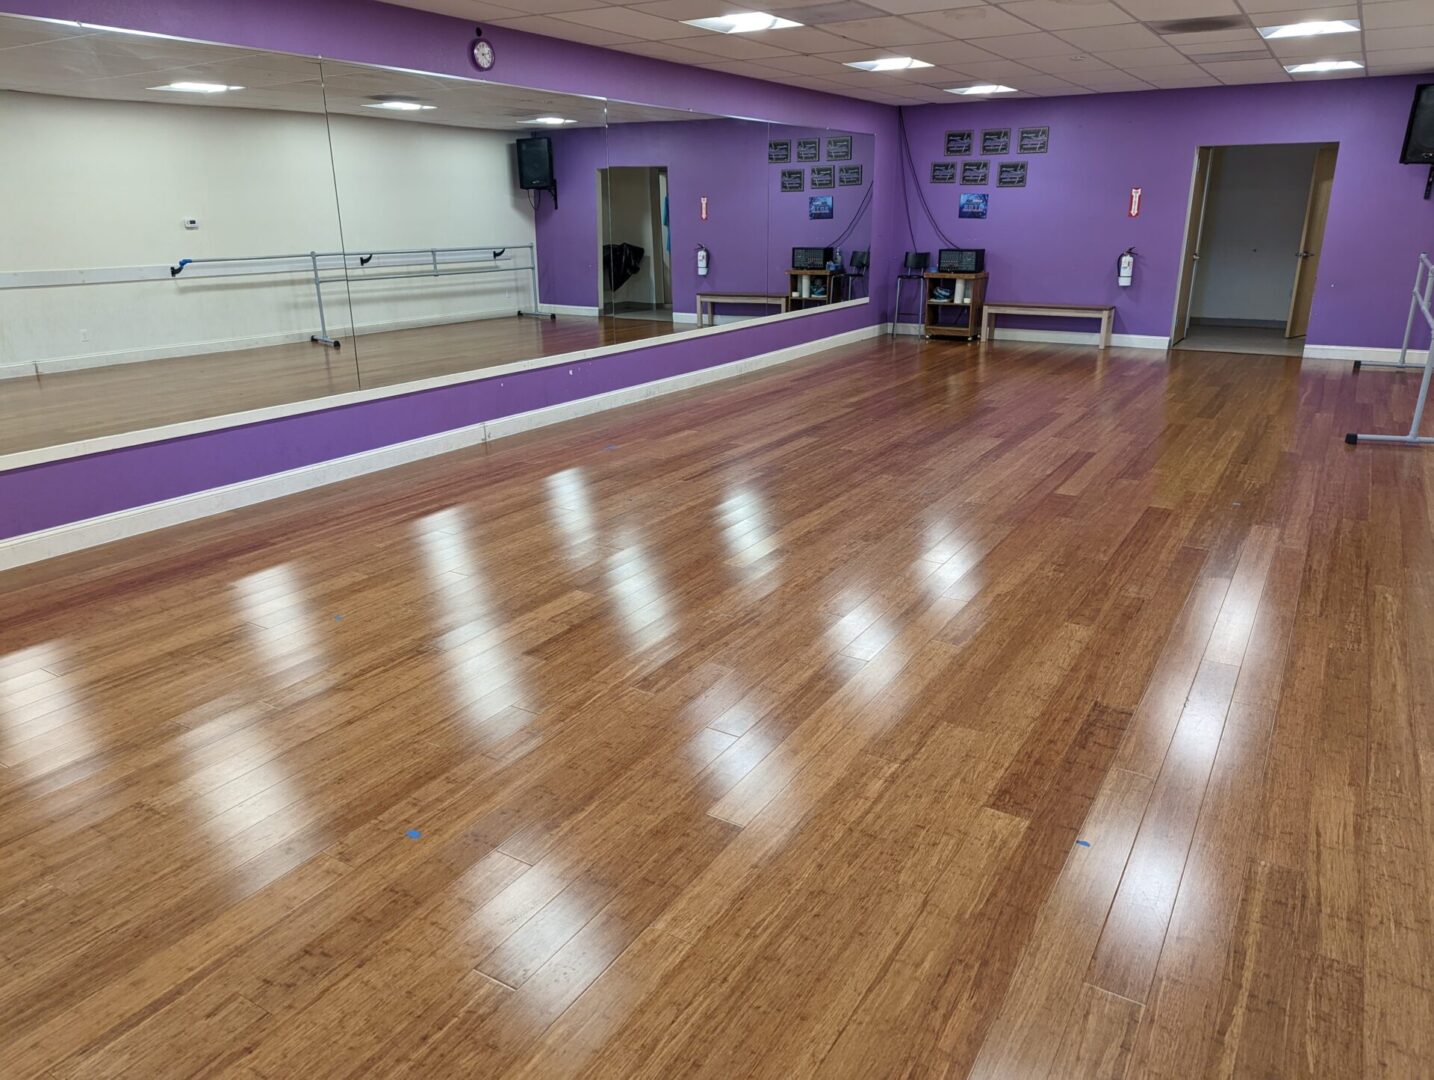 A dance studio with purple walls and wooden floors.